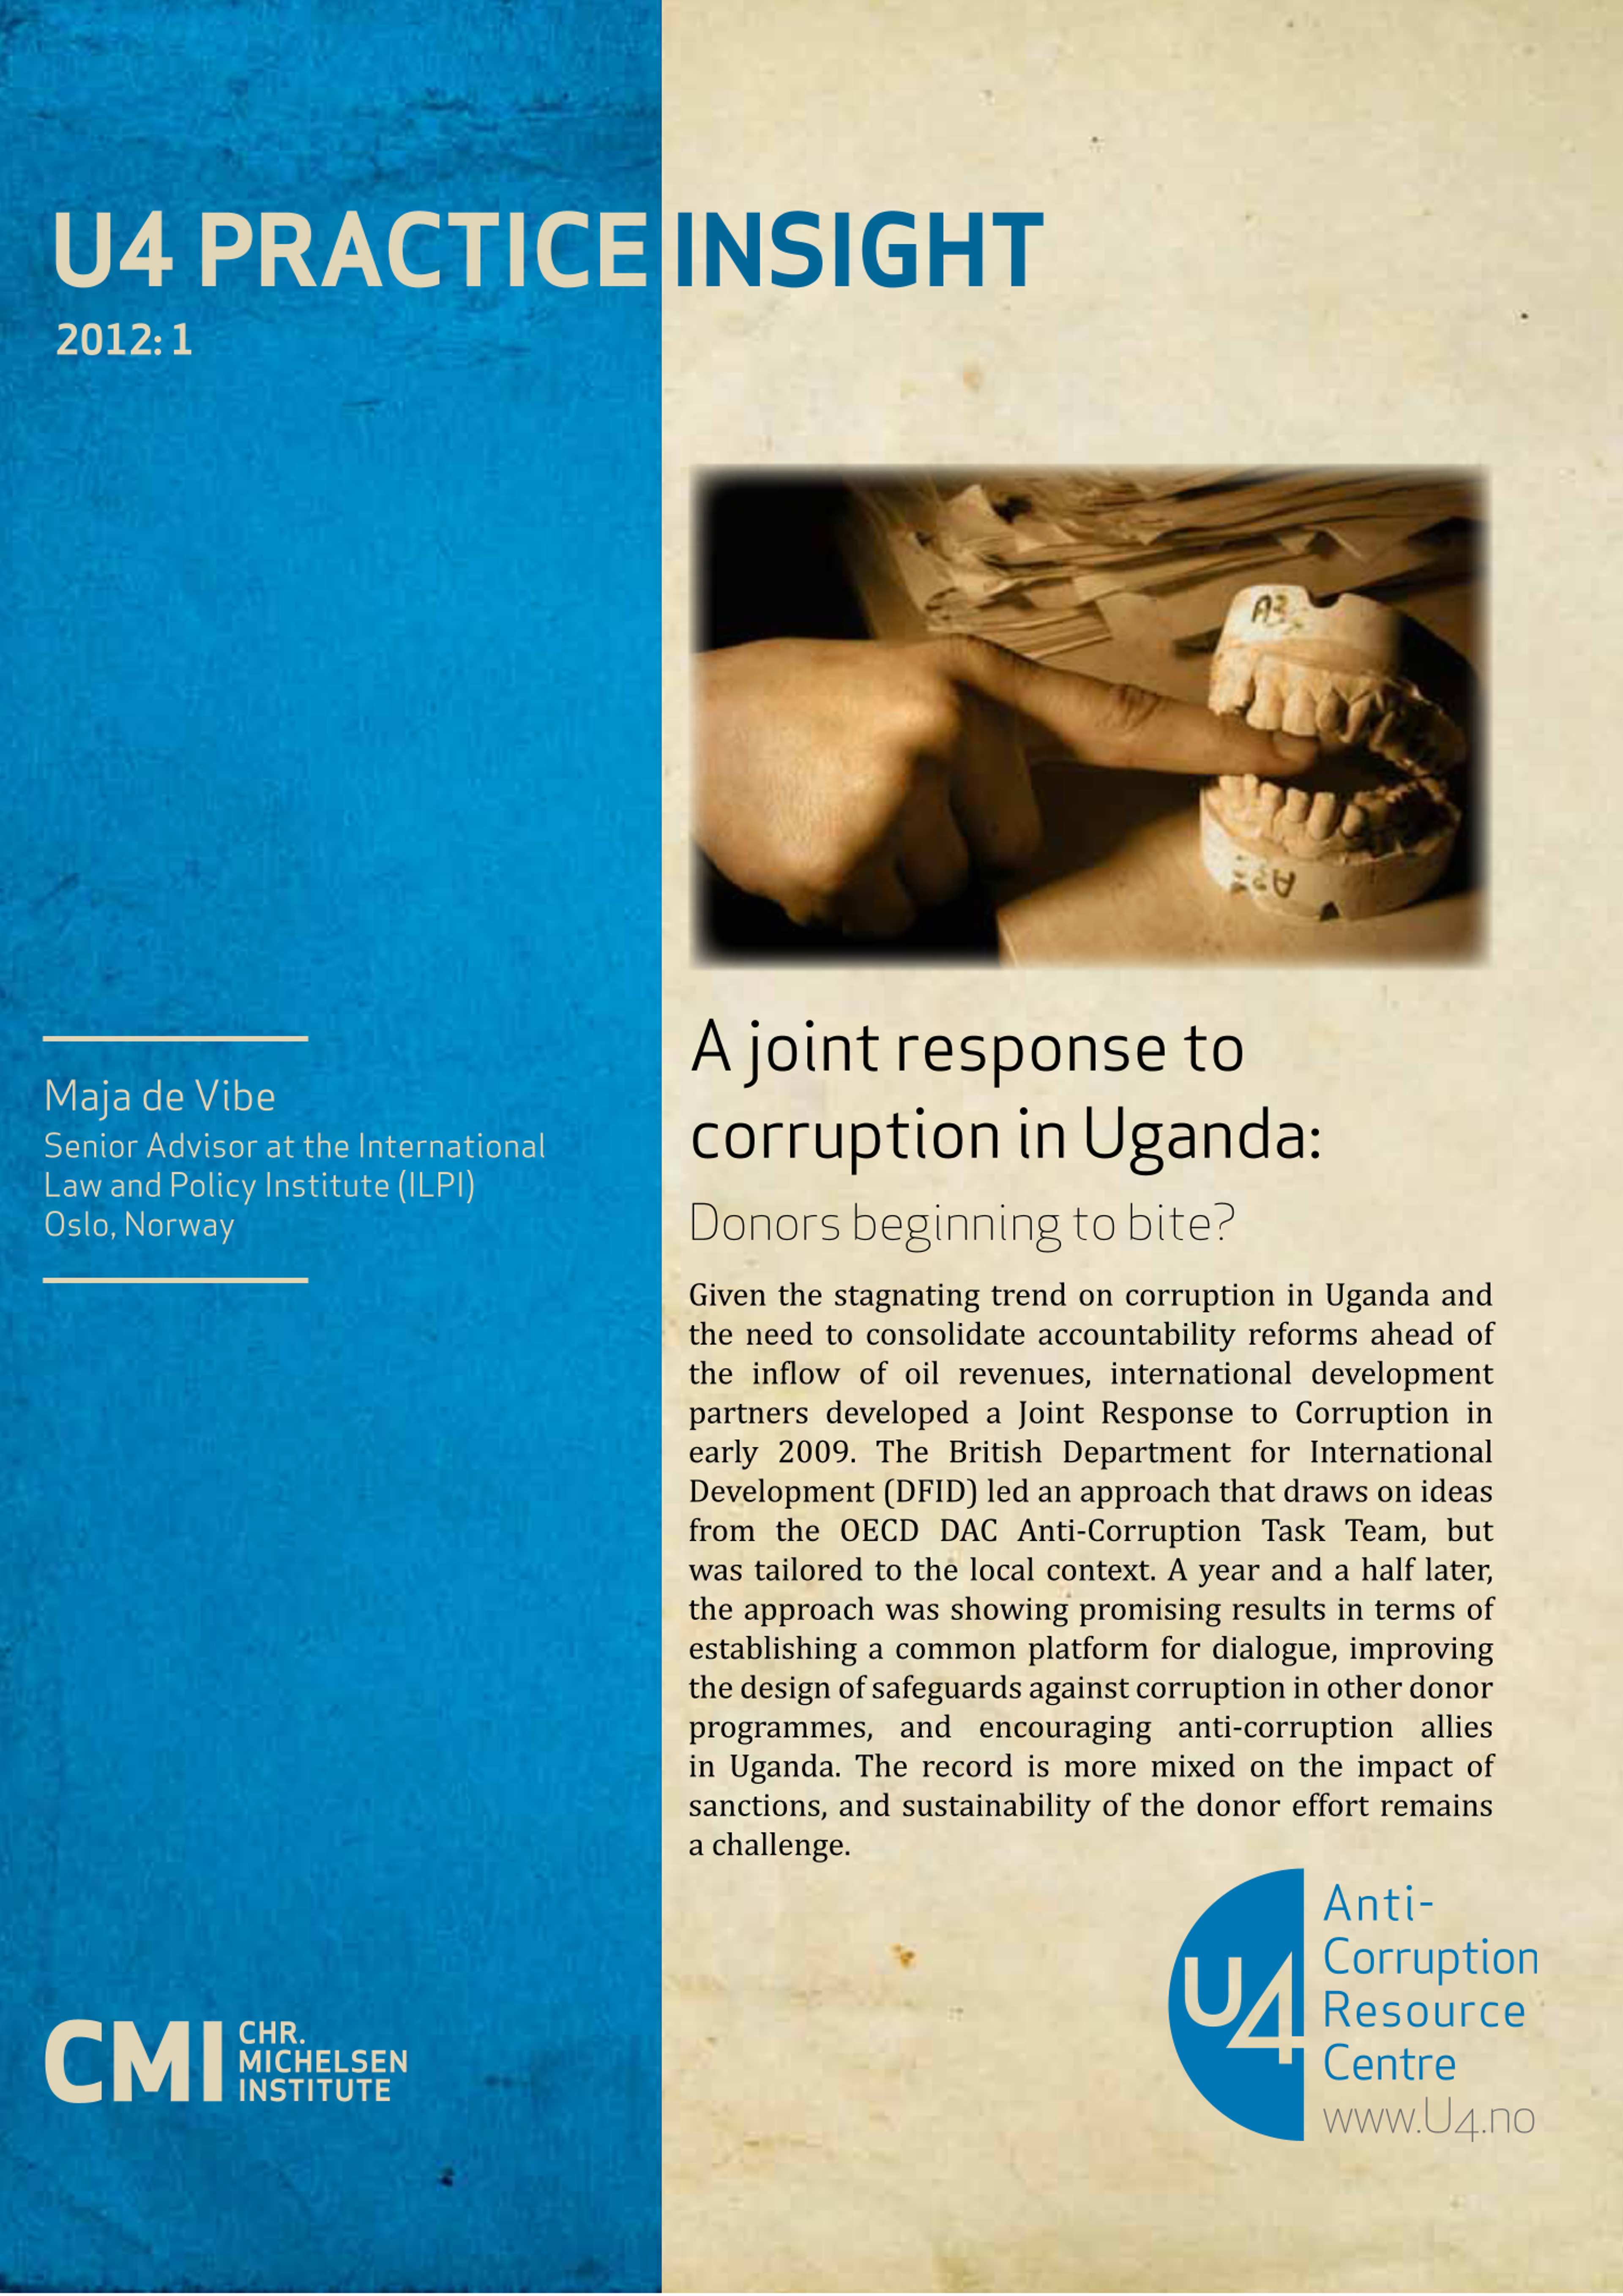 A joint response to corruption in Uganda: Donors beginning to bite?